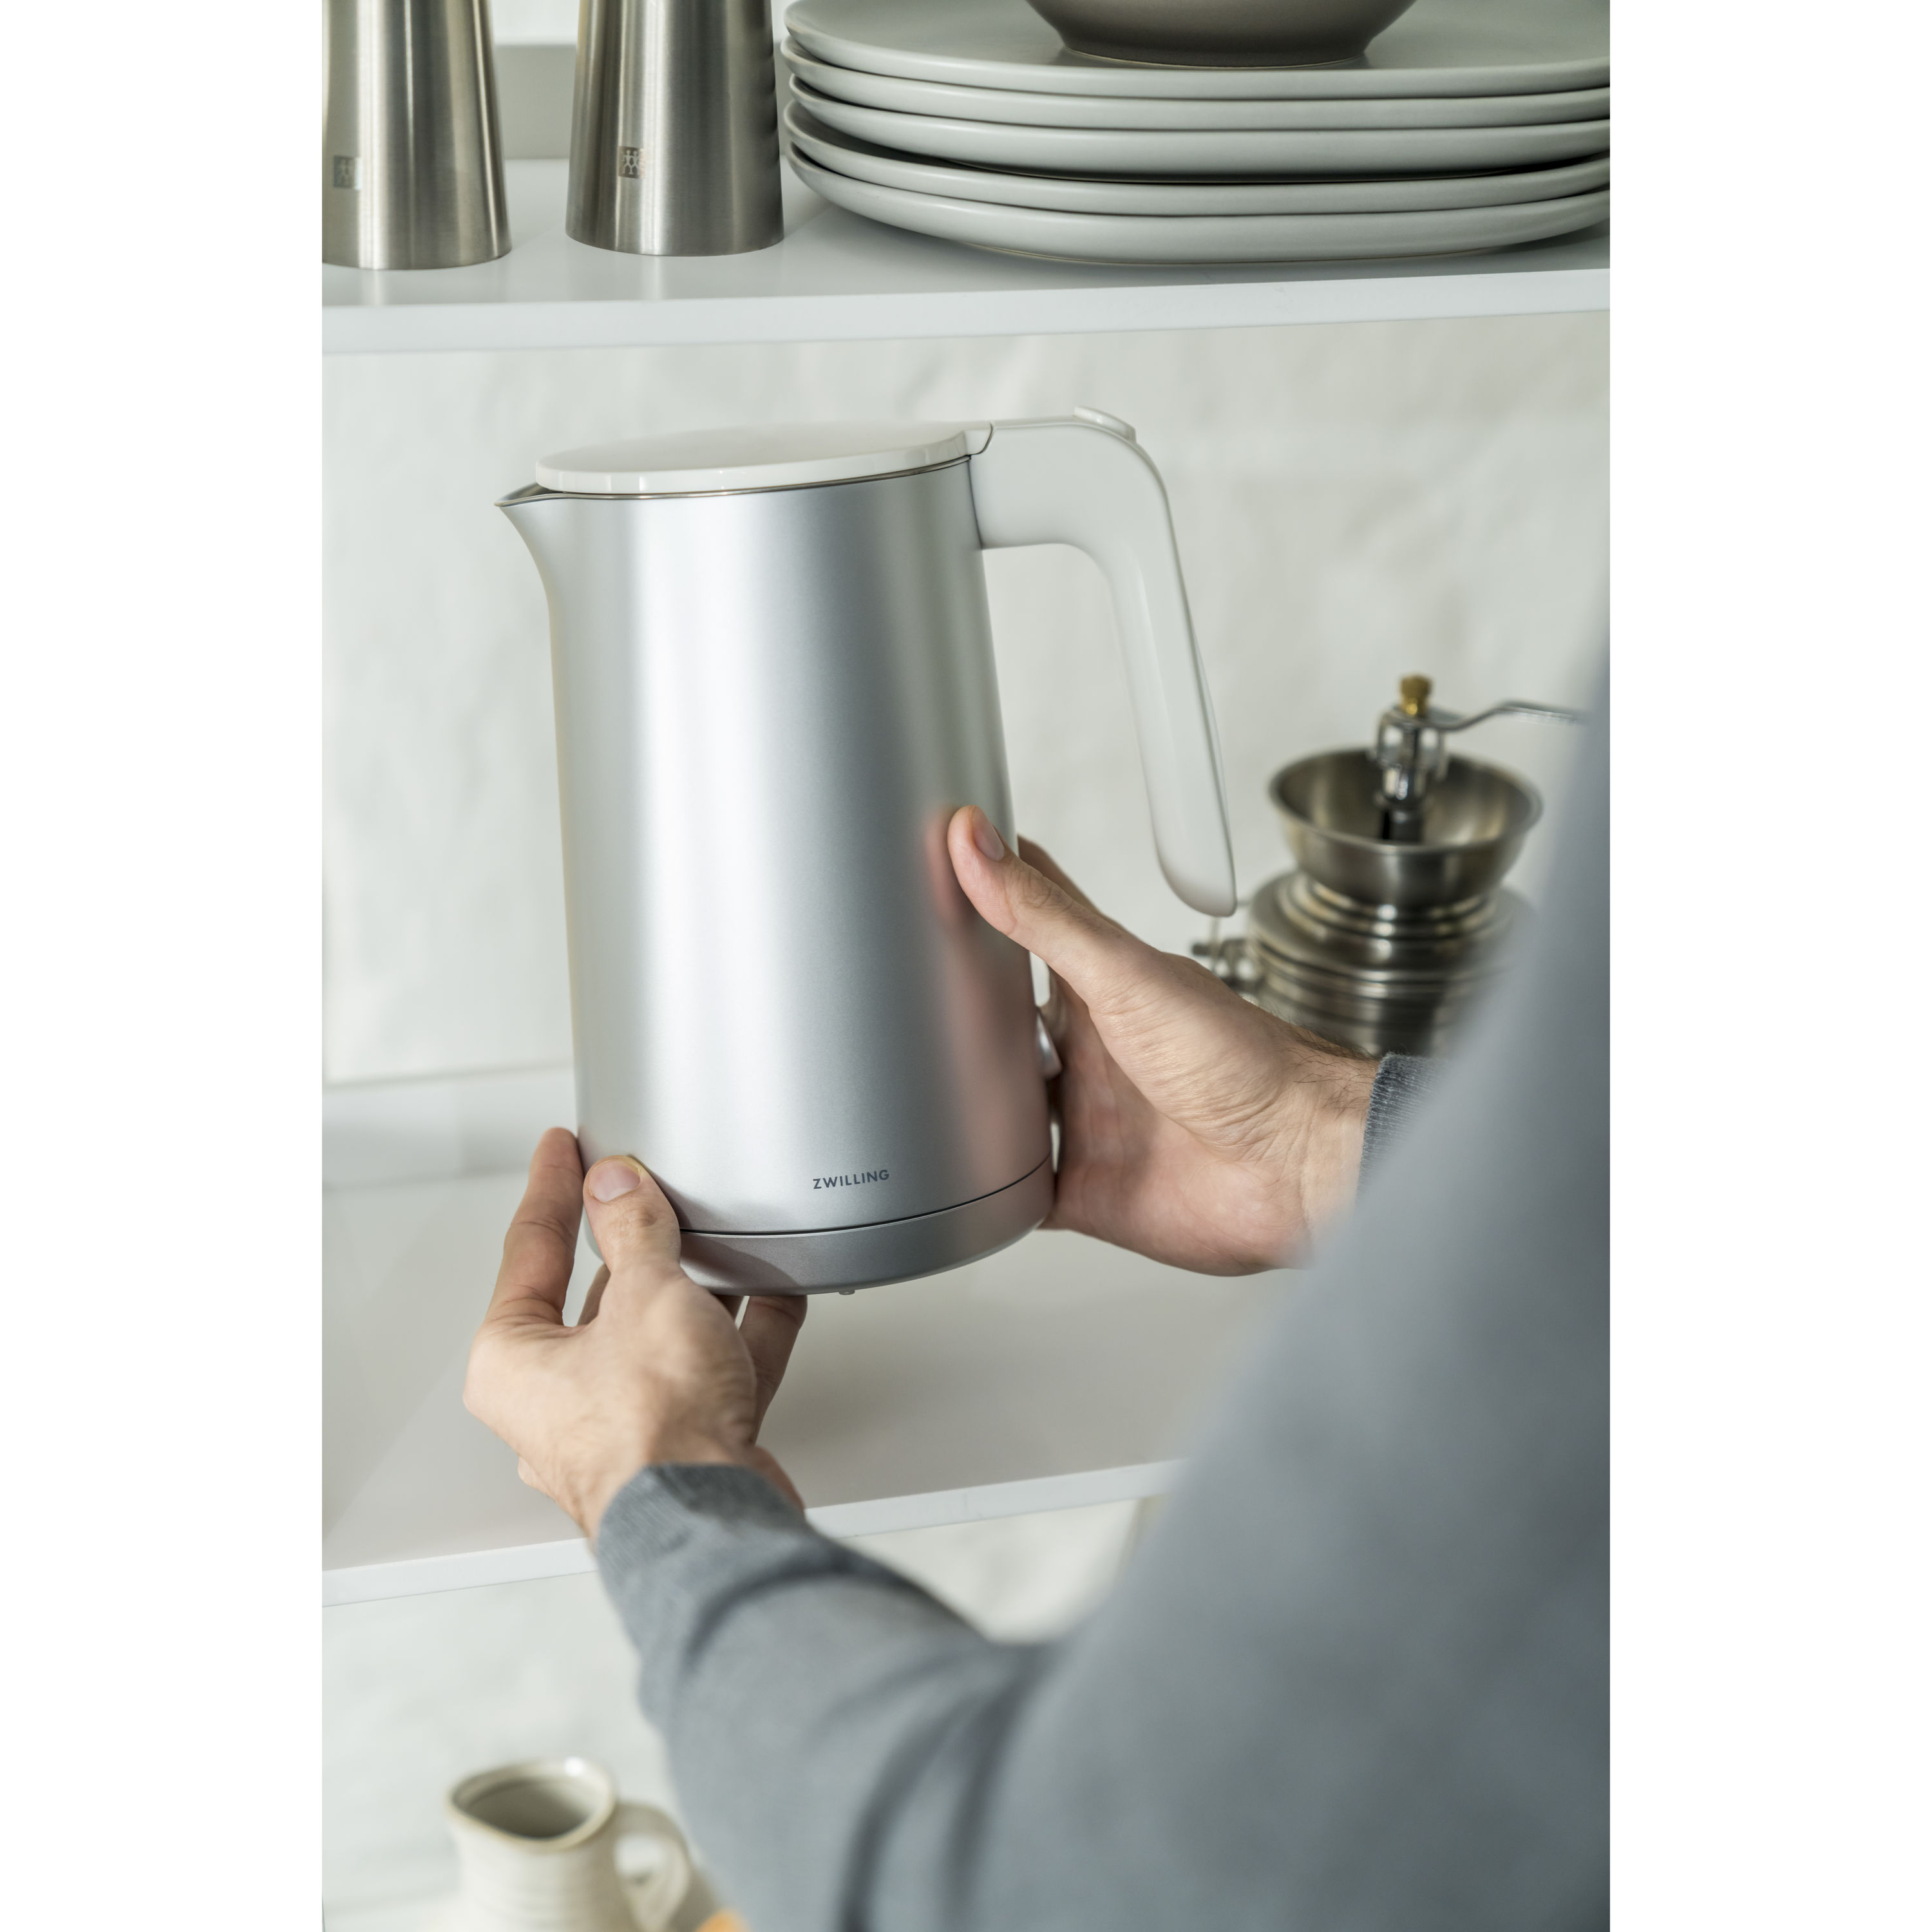 Zwilling Cool Touch Kettle with Temperature Control